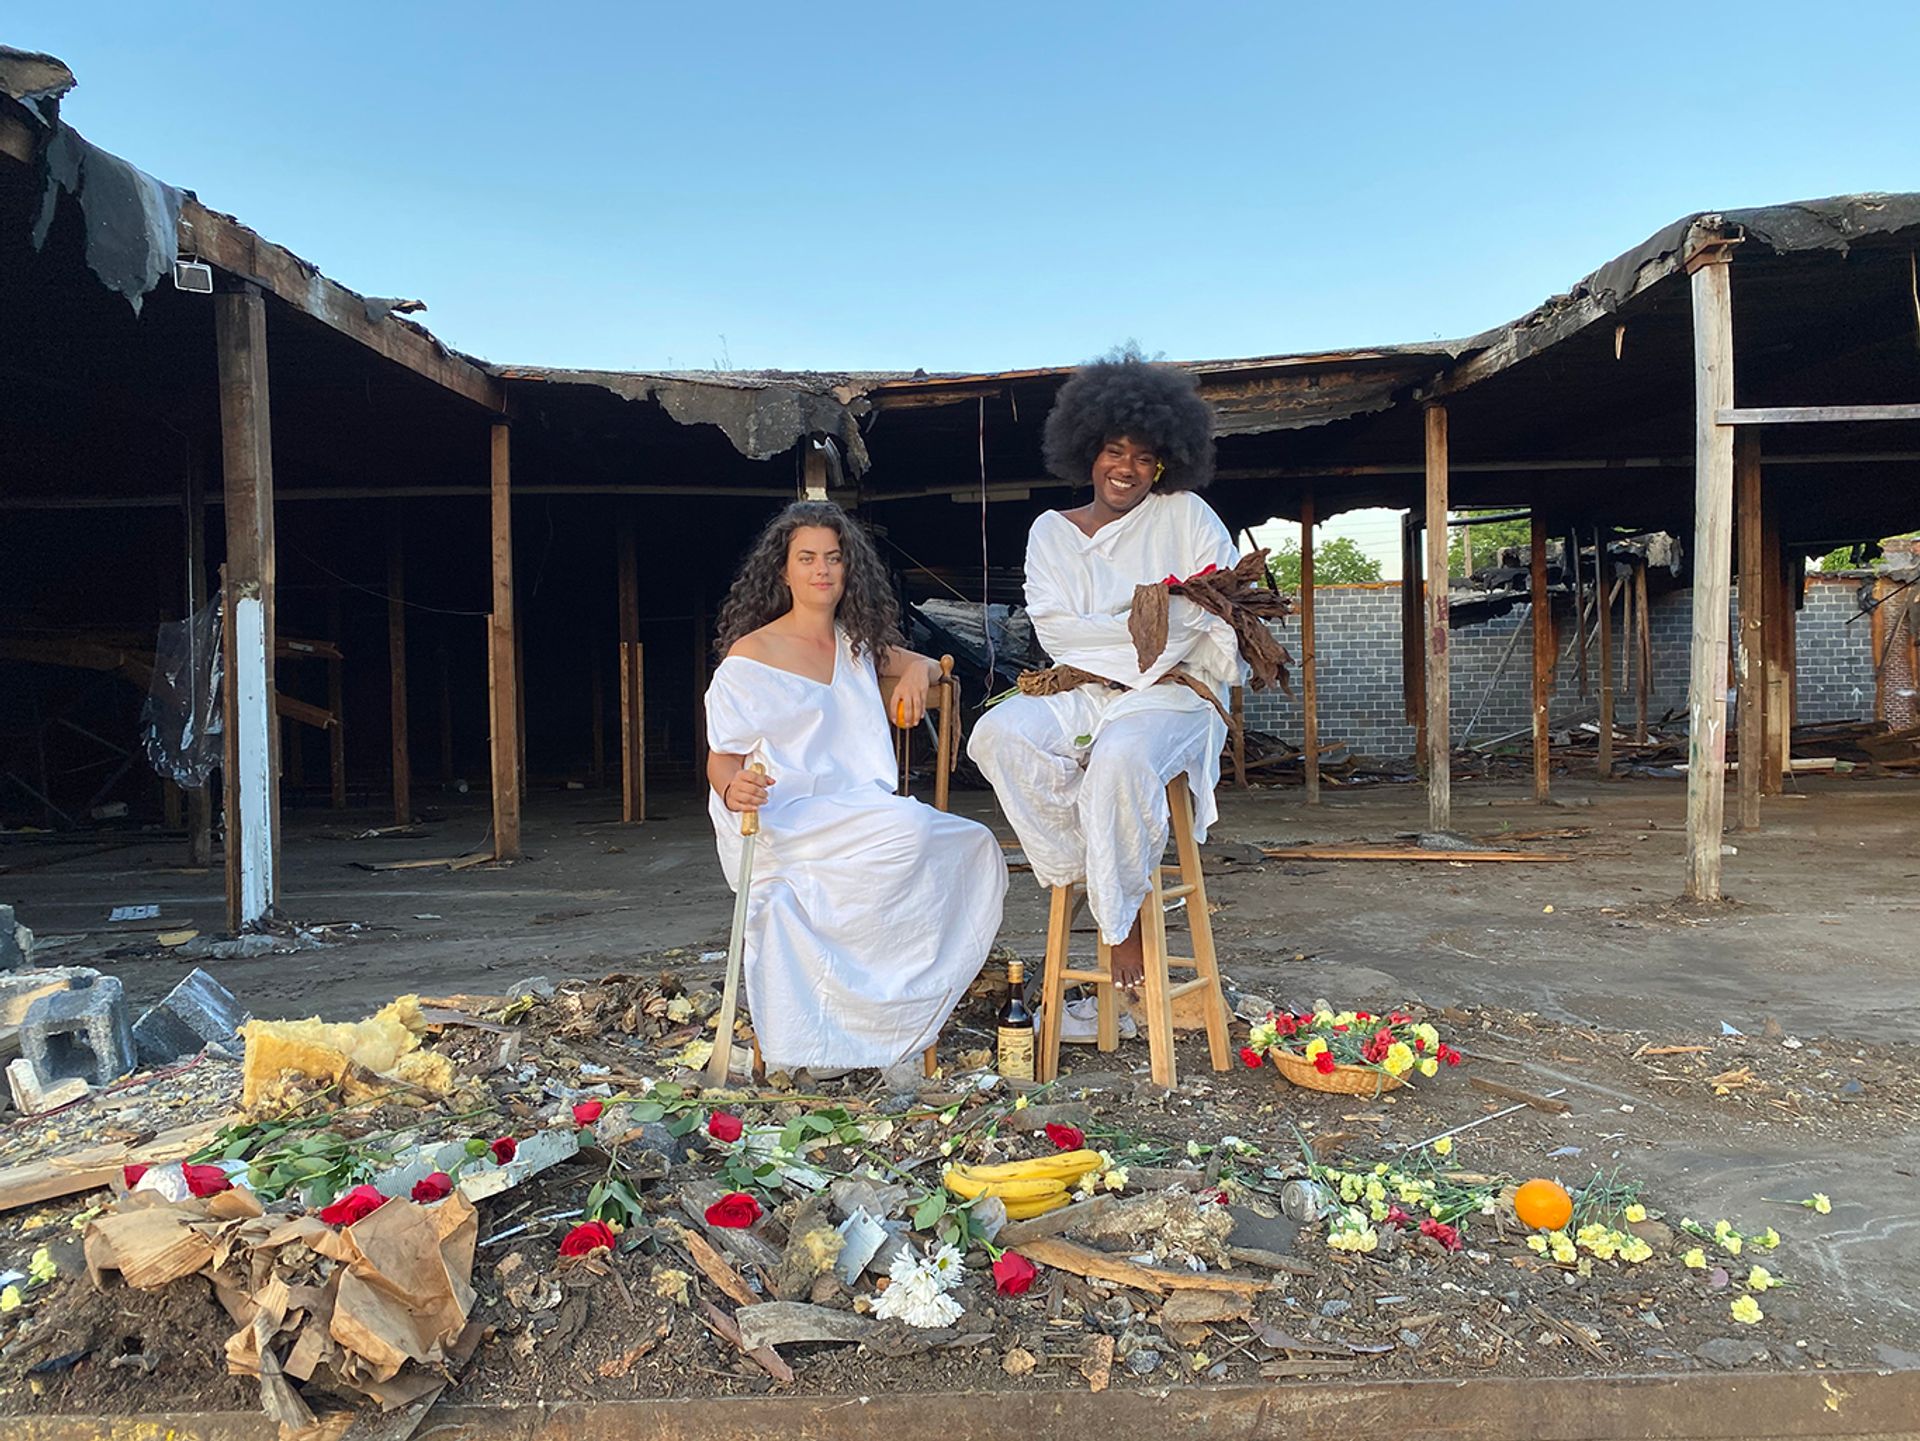 Christine Wyatt and Christina Leoni-Osion in a still from Alicia Díaz's video Entre Puerto Rico and Richmond: Women in Resistance Shall Not Be Moved (2020), co-created with Patricia Herrera, Wyatt, Leoni-Osion, Luis Vasquez La Roche, Héctor "Coco" Barez, Yaraní del Valle and David Riley, and to be released digitally Courtesy of the artist and collaborators